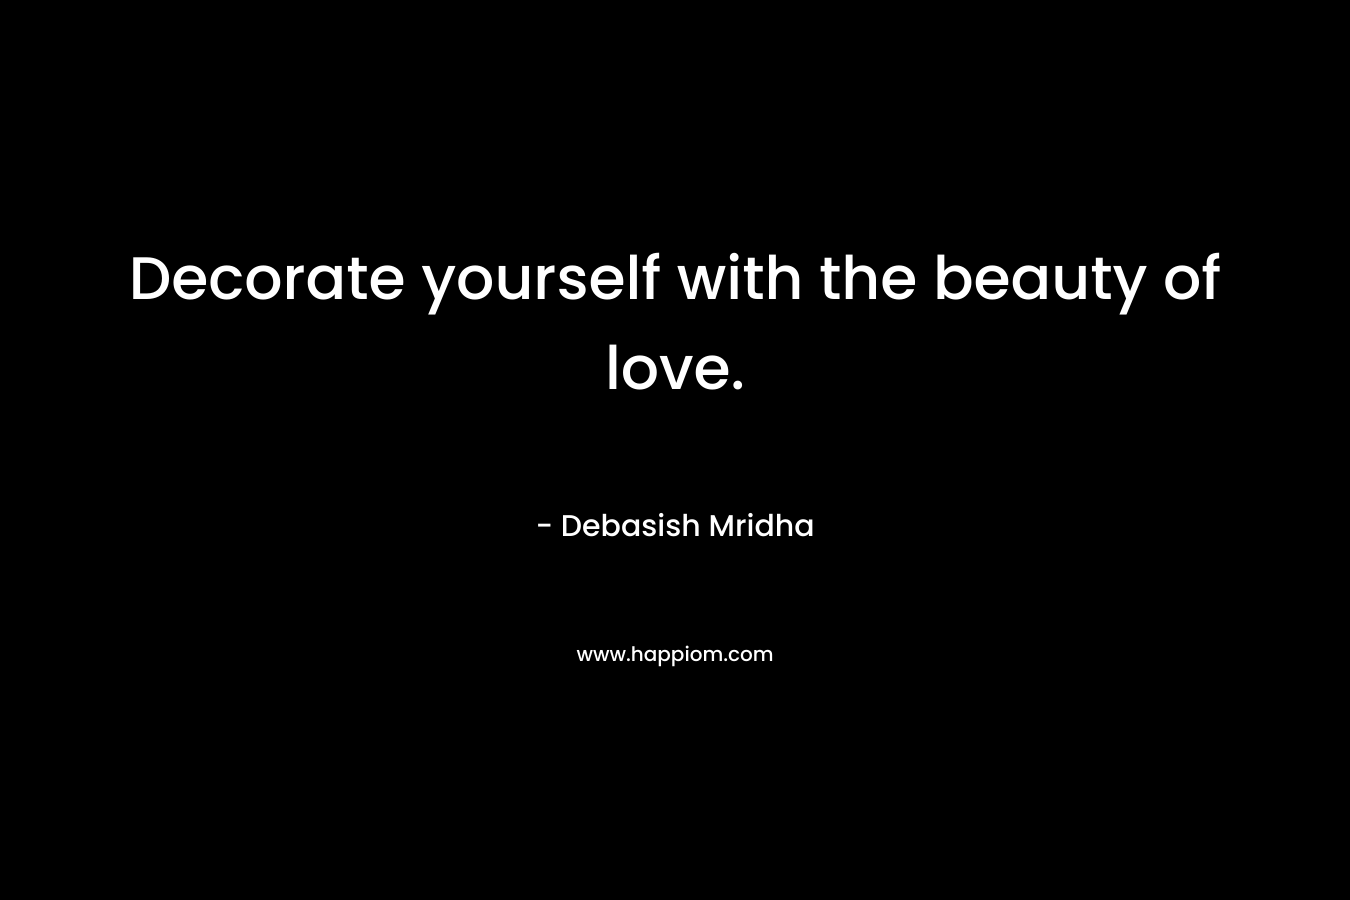 Decorate yourself with the beauty of love.